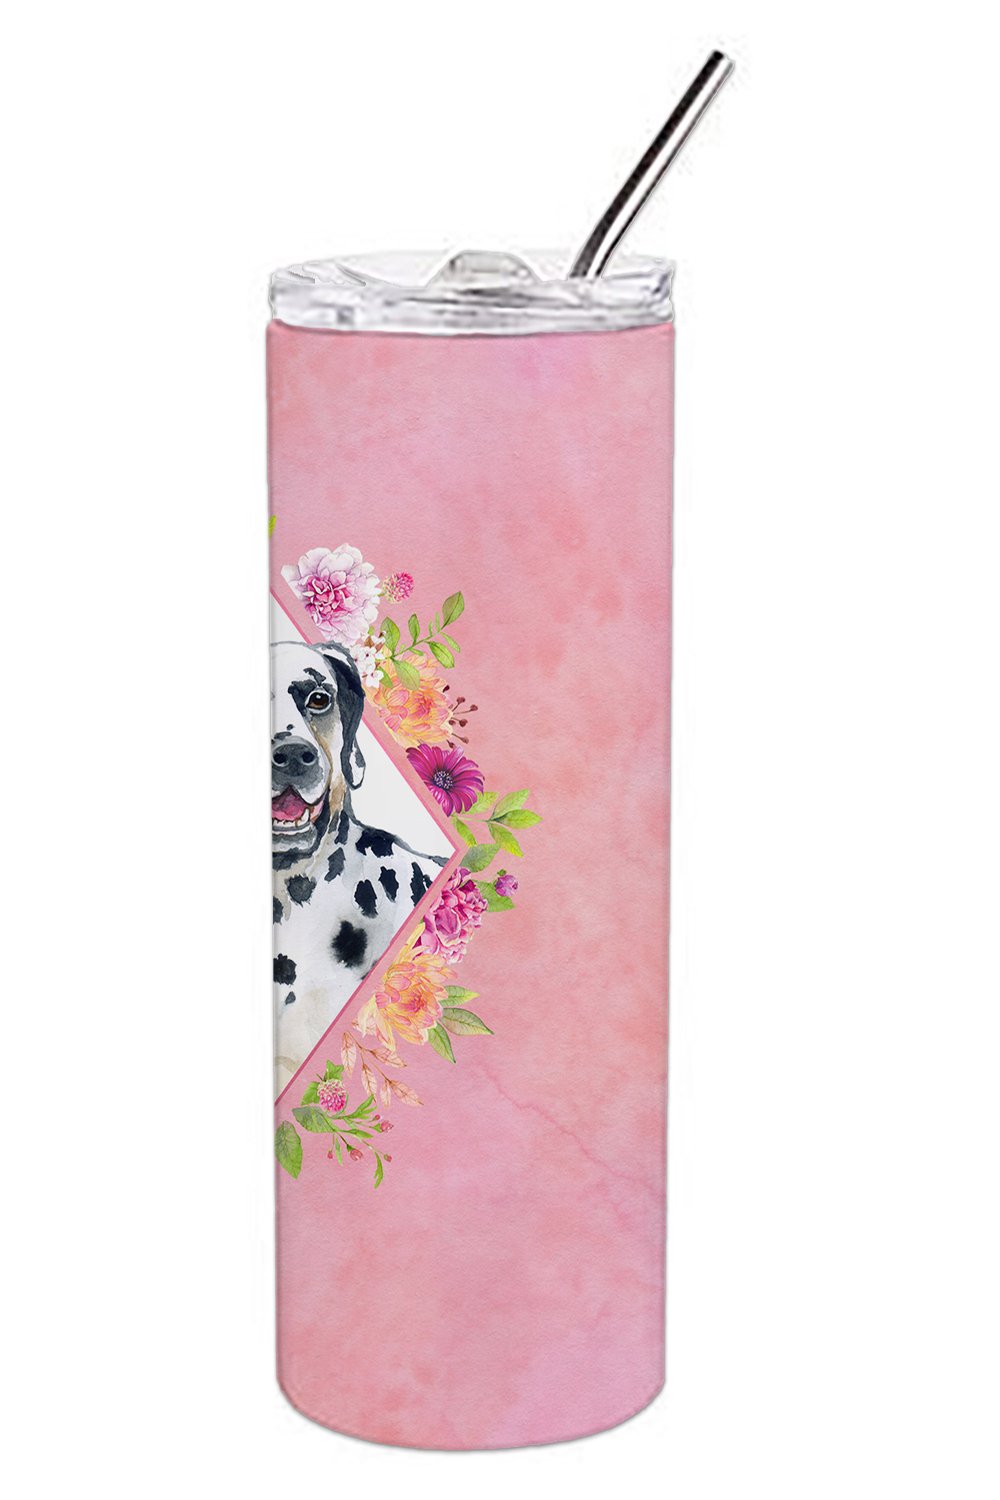 Dalmatian Pink Flowers Double Walled Stainless Steel 20 oz Skinny Tumbler CK4137TBL20 by Caroline's Treasures